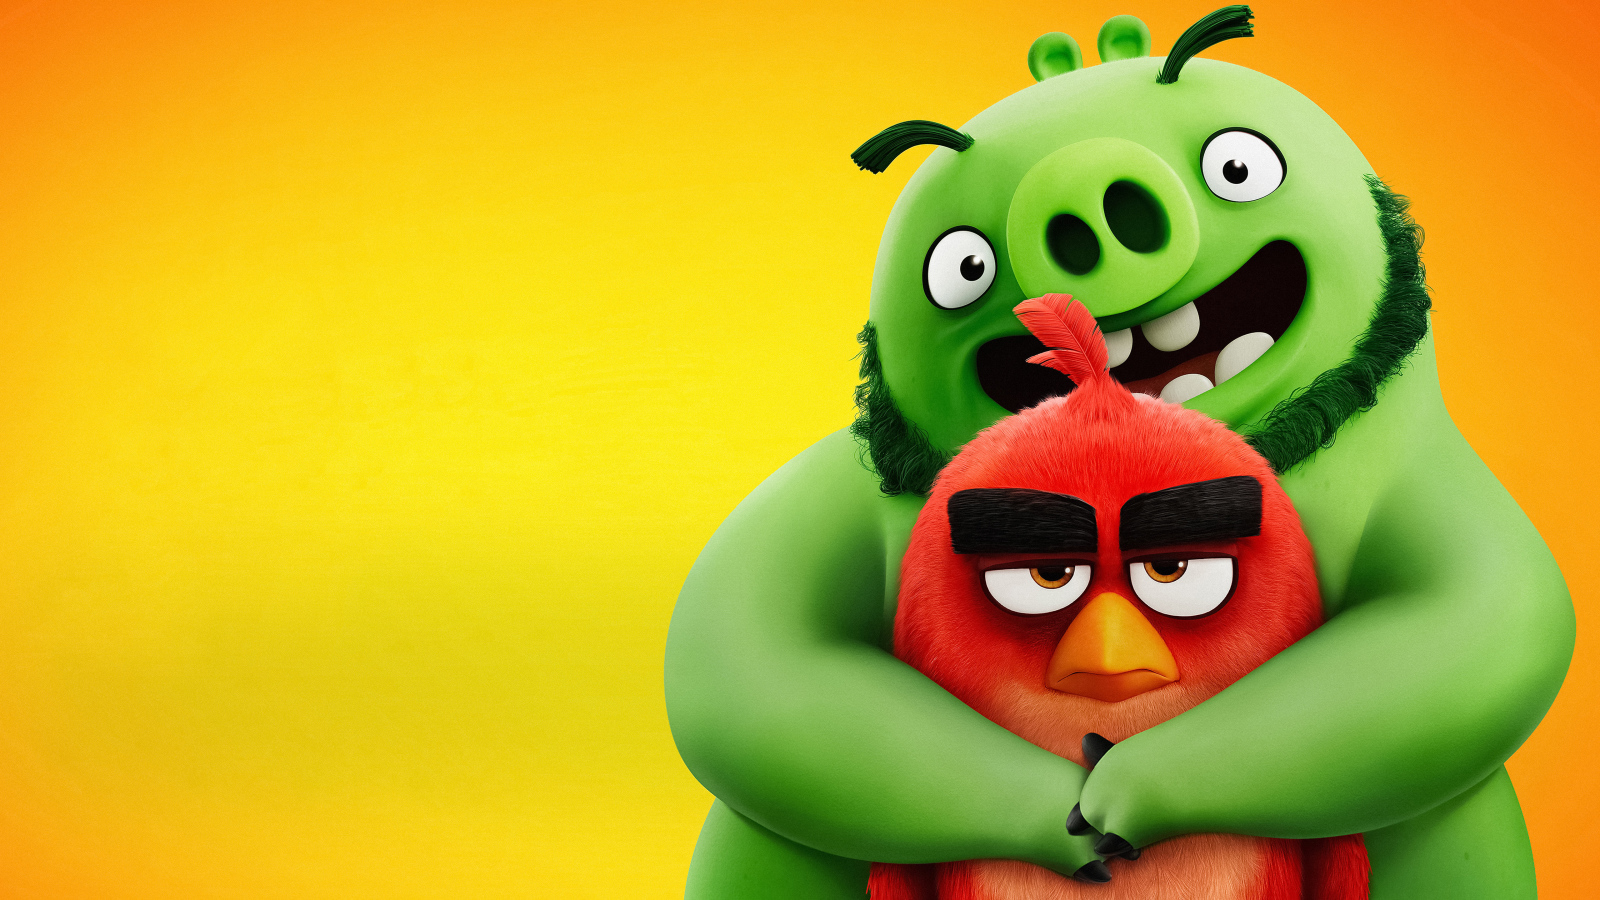 Leonard and Red Angry Birds 2 cartoon characters in the movie